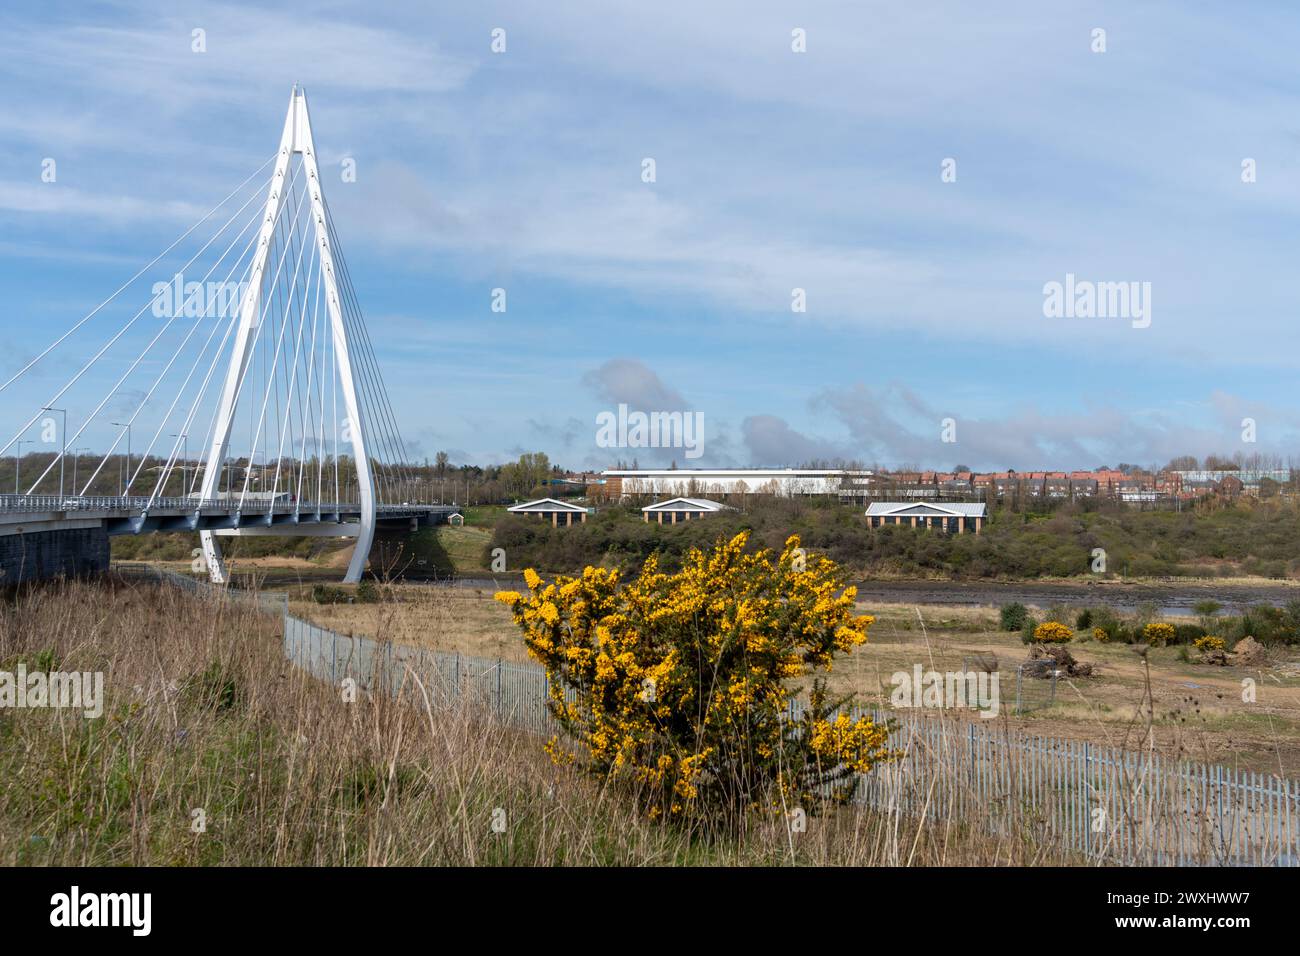 Site future Crown Works Studios in Sunderland, UK by River Wear in Pallion. FulwellCain Studios plan one of the largest filmmaking complexes in Europe Stock Photo